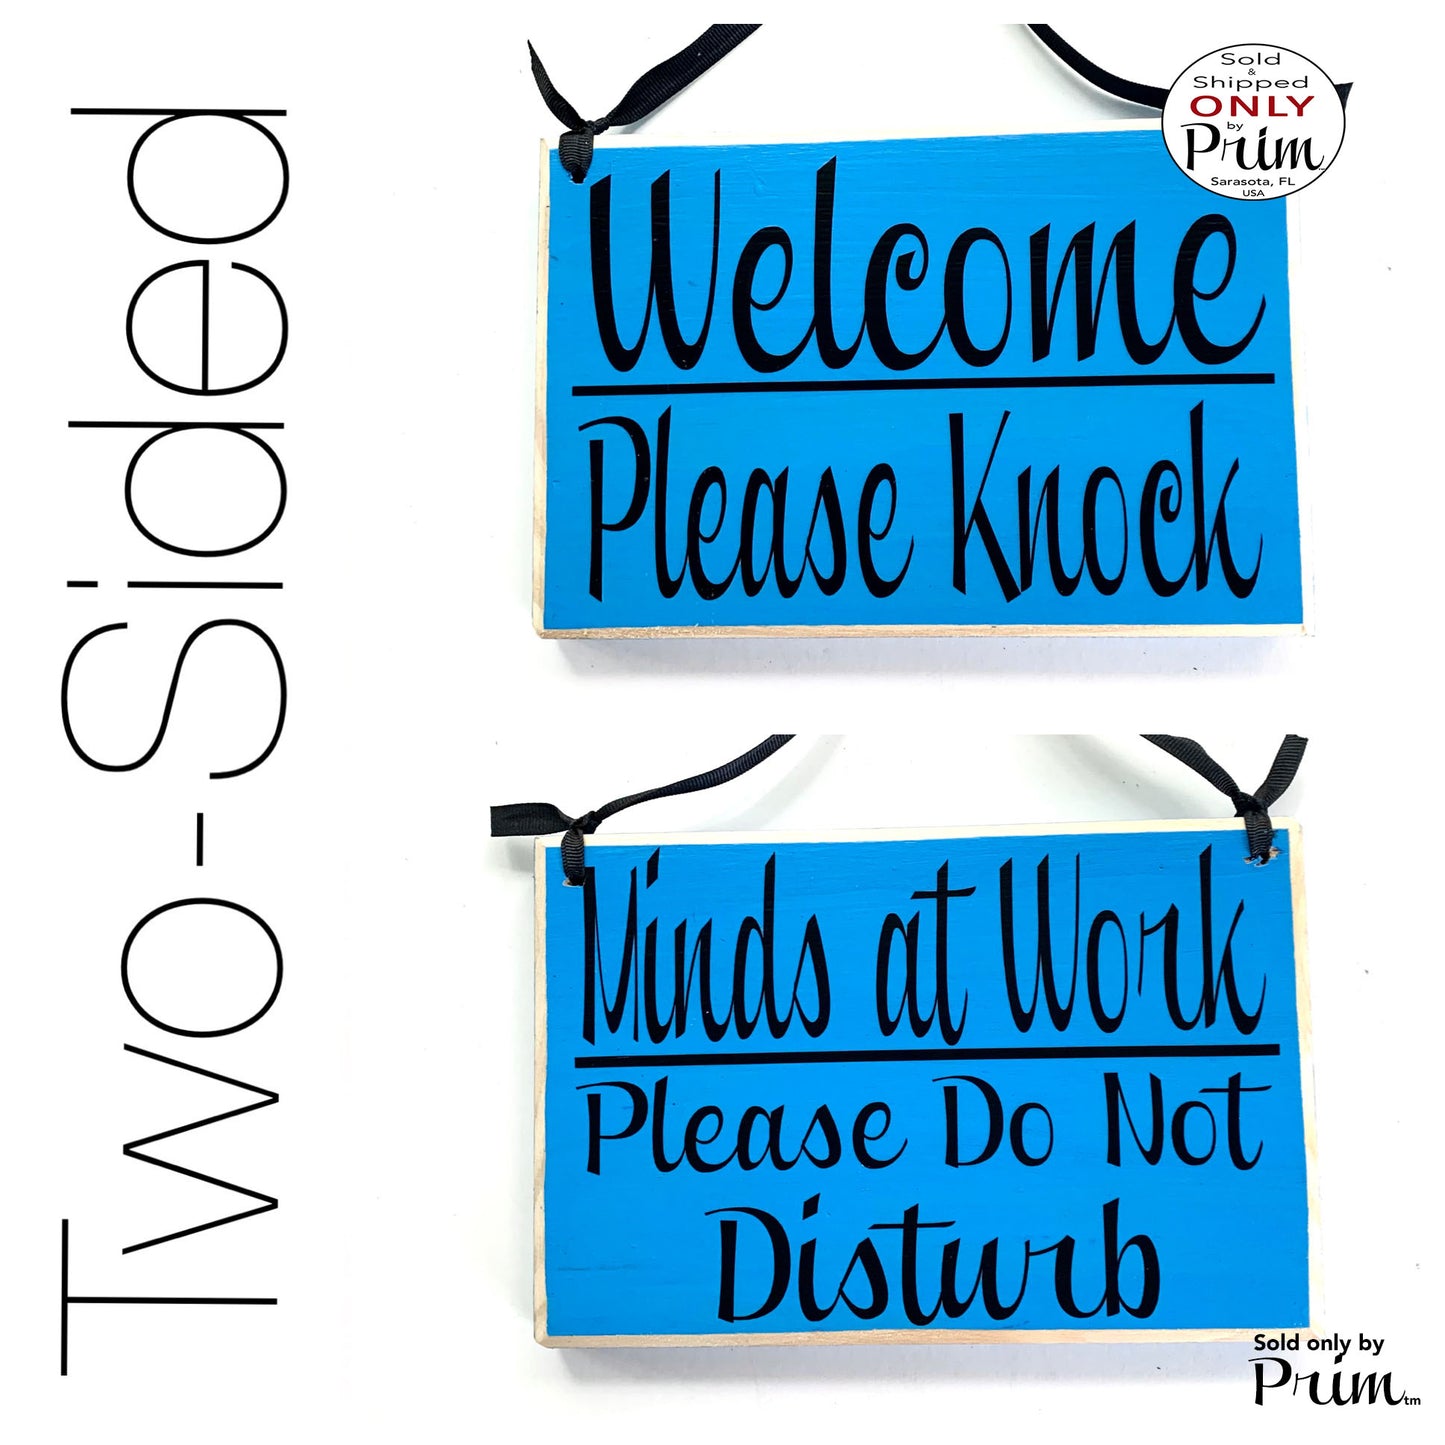 Two Sided 8x6 Welcome Please Knock Minds At Work Please Do Not Disturb Custom Wood Sign Session Busy Unavailable Meeting Office Door Hanger Designs by Prim